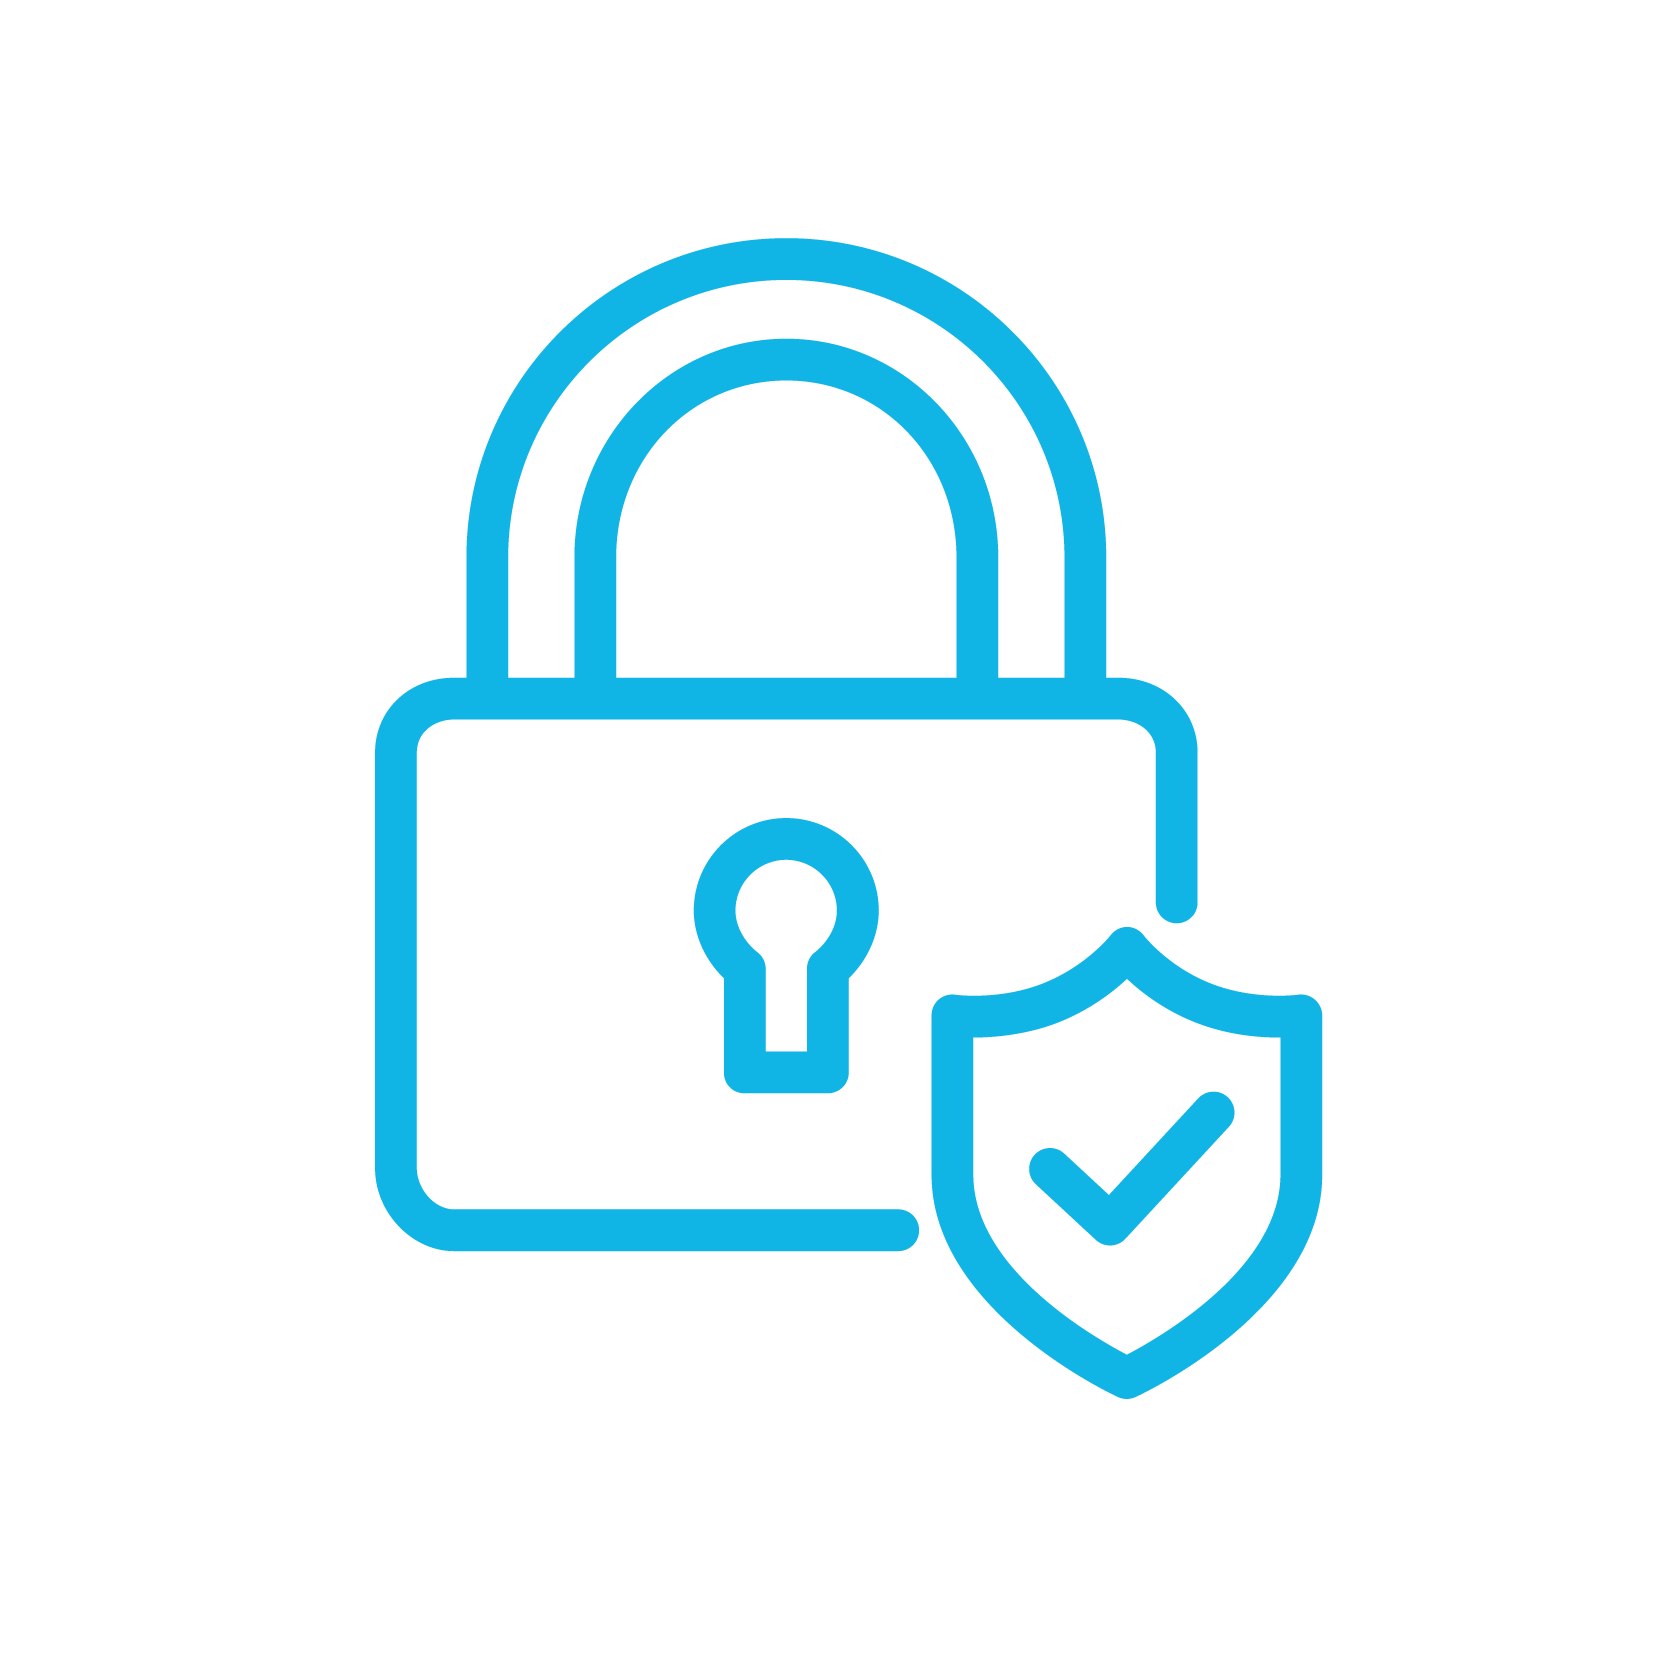 Advanced Security - An icon of a lock with a shield in front of it, and a check-mark on the shield.  This represents the advanced security of information on HammerTech's platform, which exceeds industry standards for data protection, compliance, performance and usability.